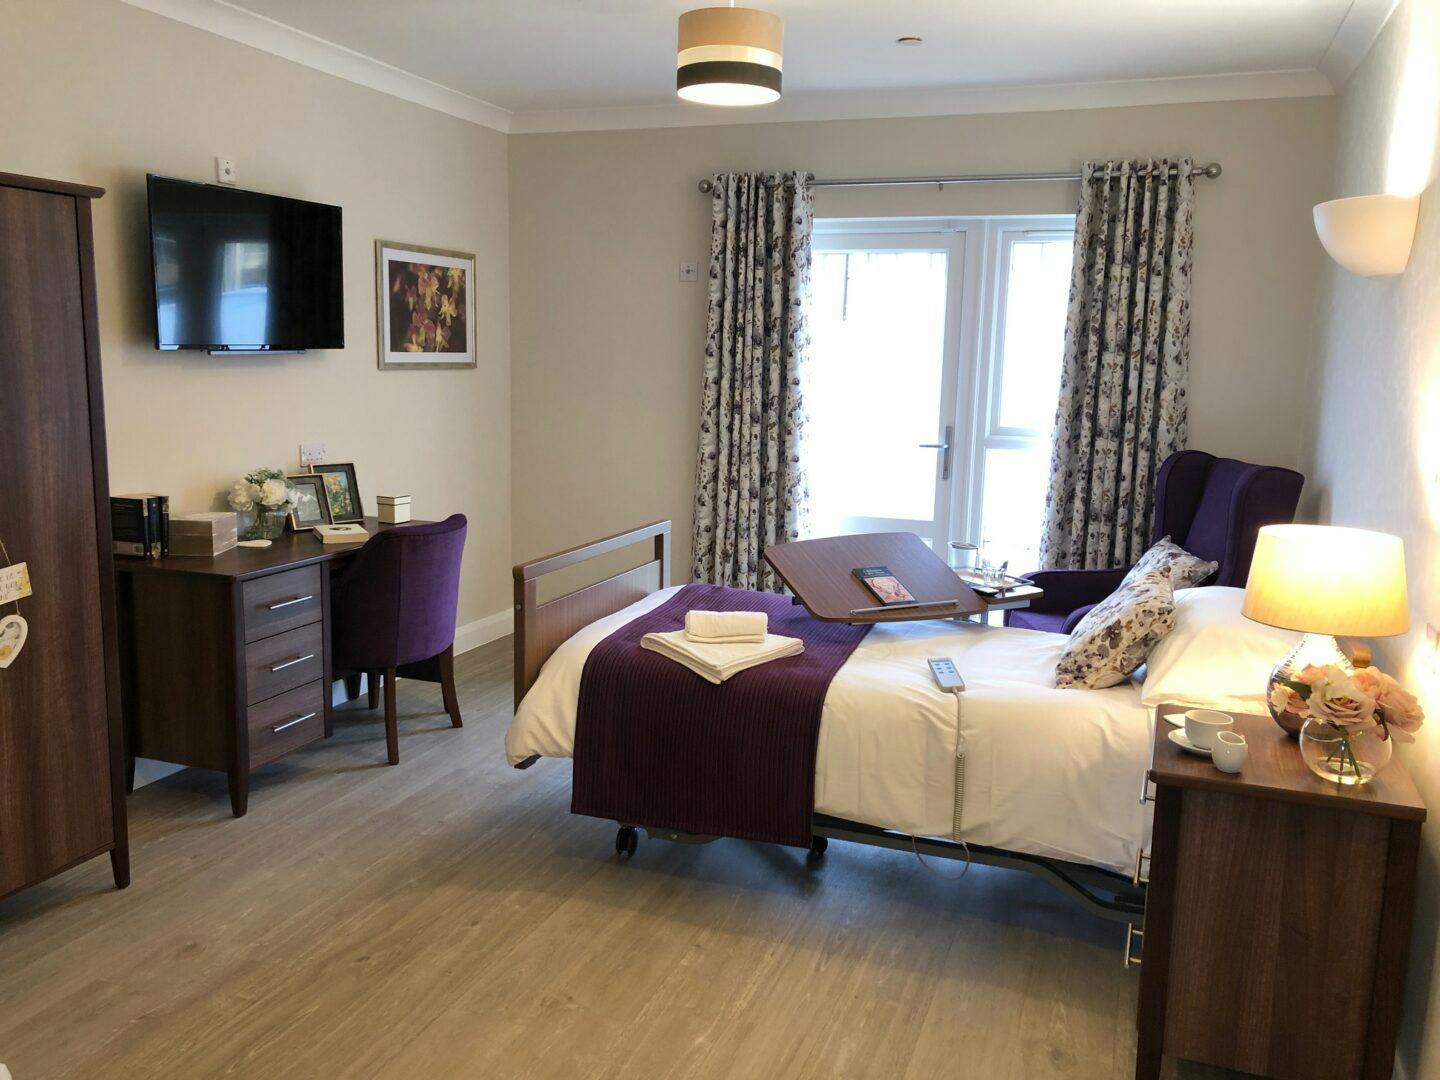 Bedroom at Bishop's Cleeve Care Home in Cheltenham, Gloucestershire